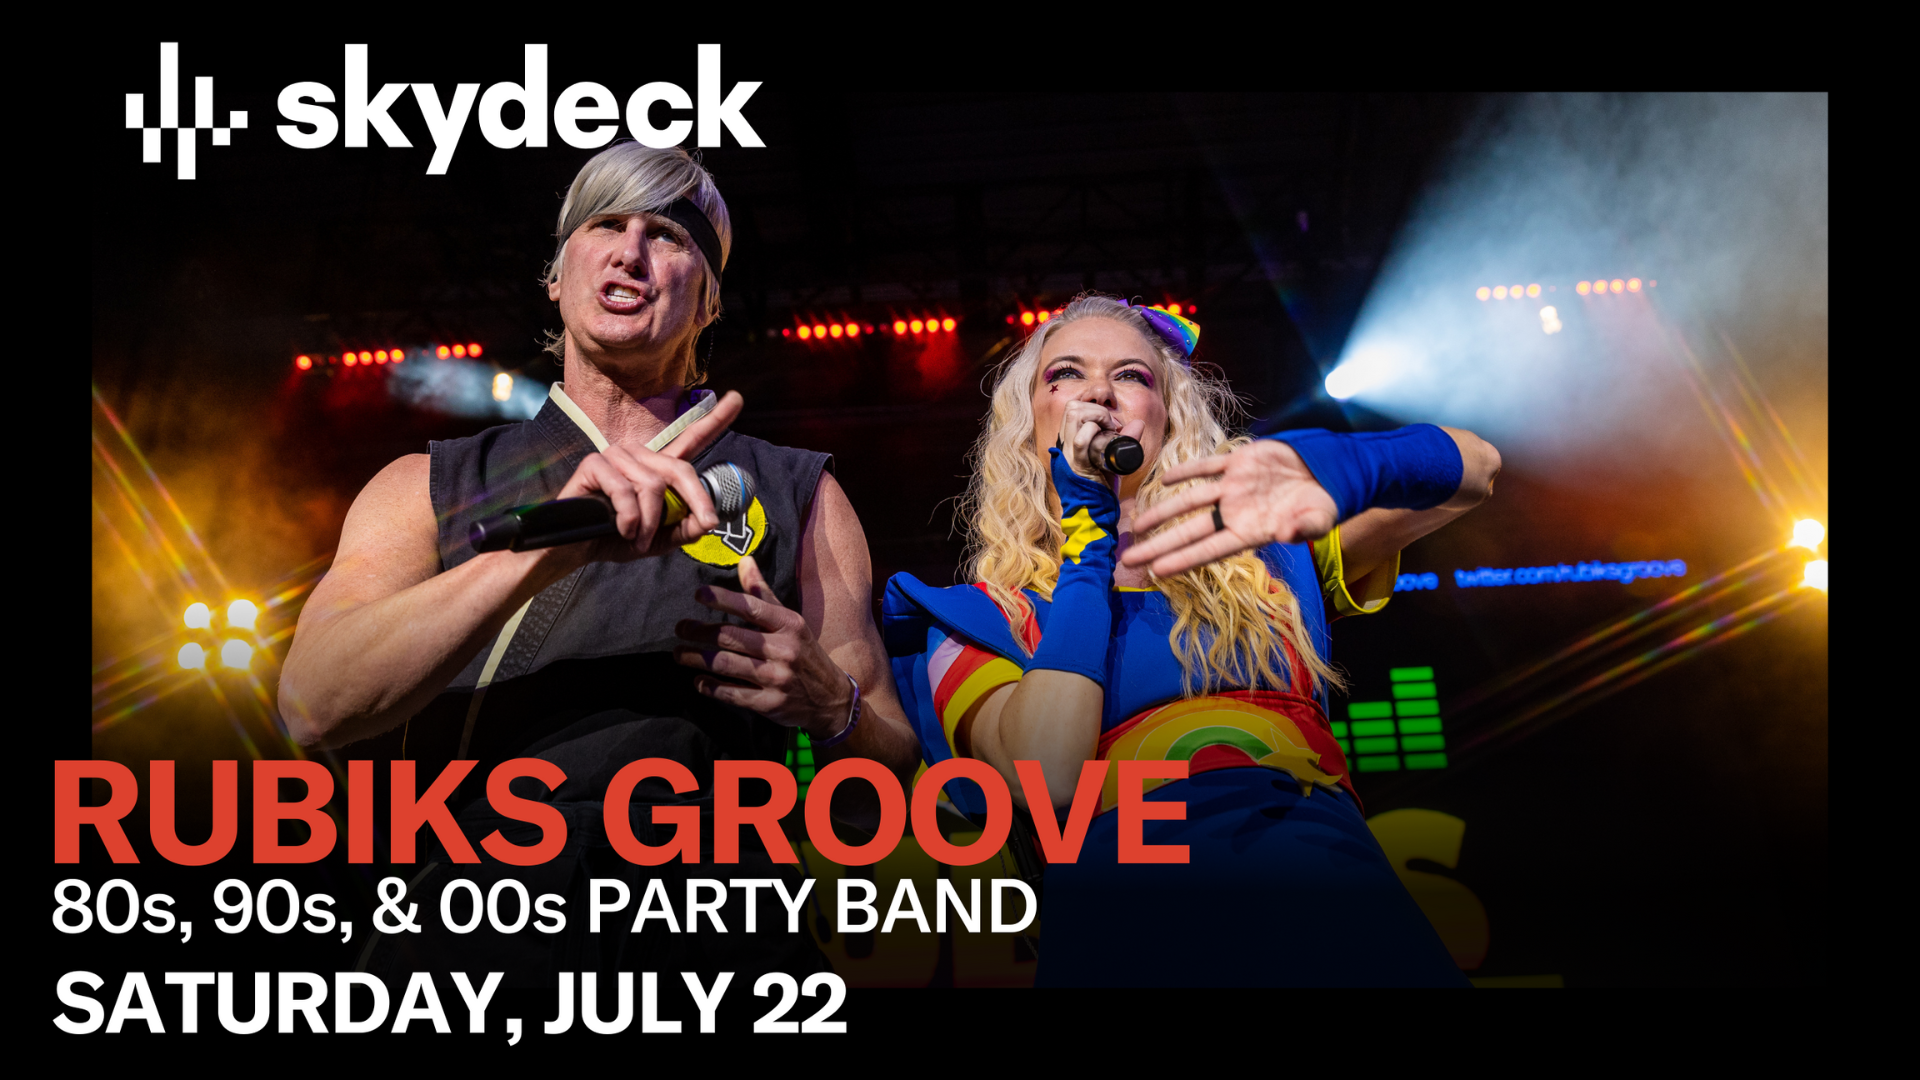 Promo image of 80s, 90s, 00s Party Band: Rubiks Groove on Skydeck